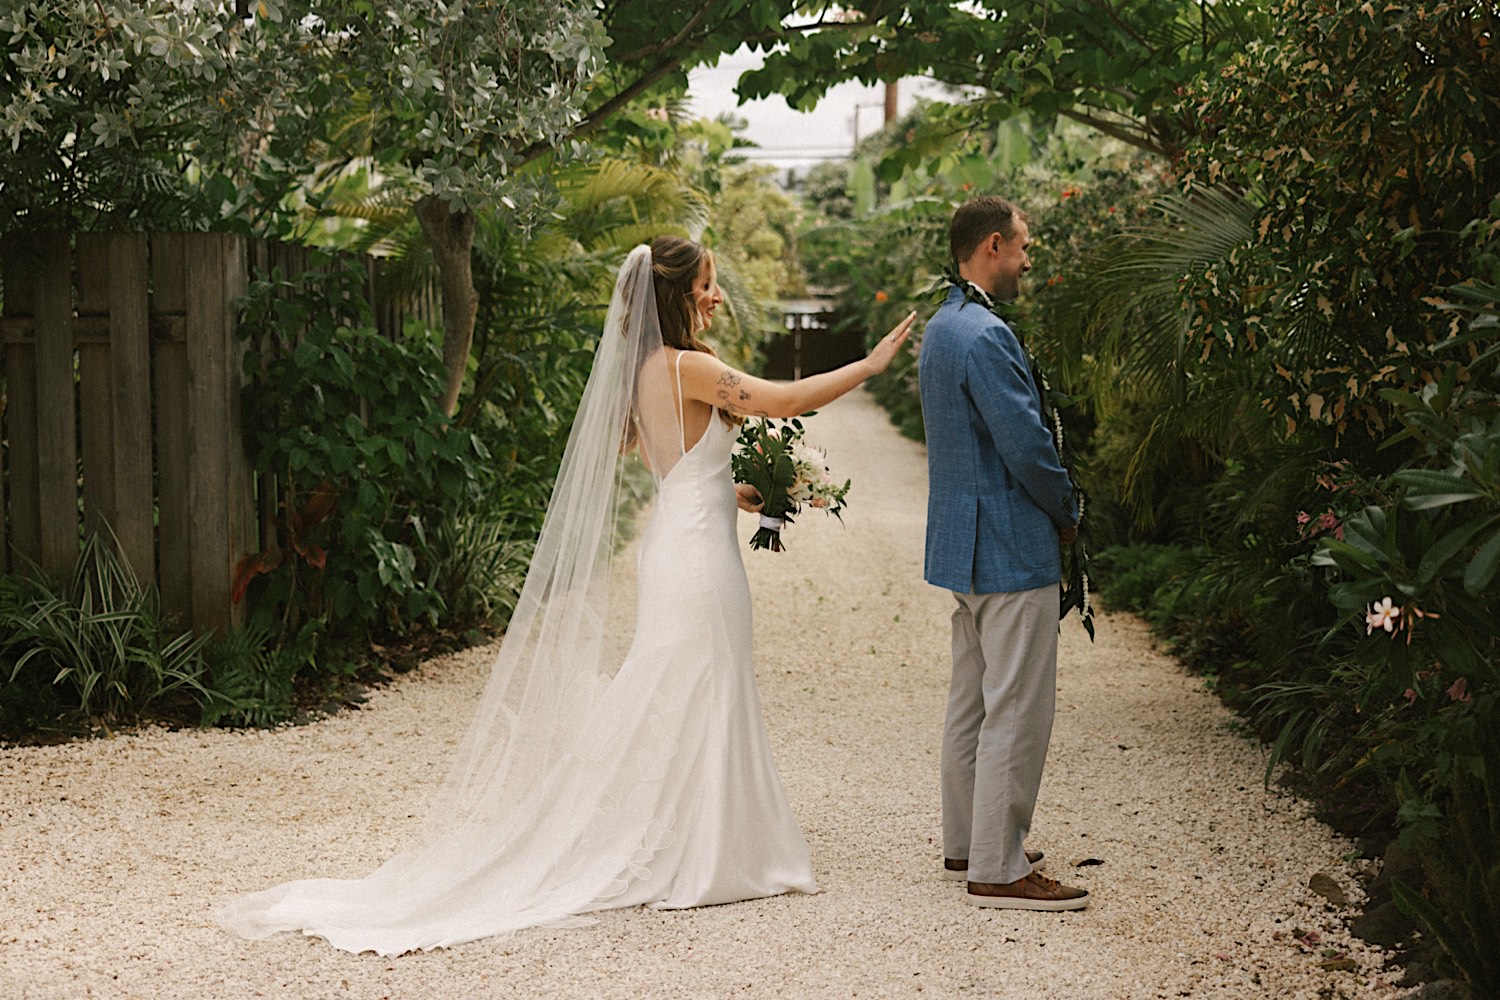 A bride is about to tap the groom on his shoulder for their first look on their wedding day in Hawaii, they couple is standing on a stone path surrounded by greenery